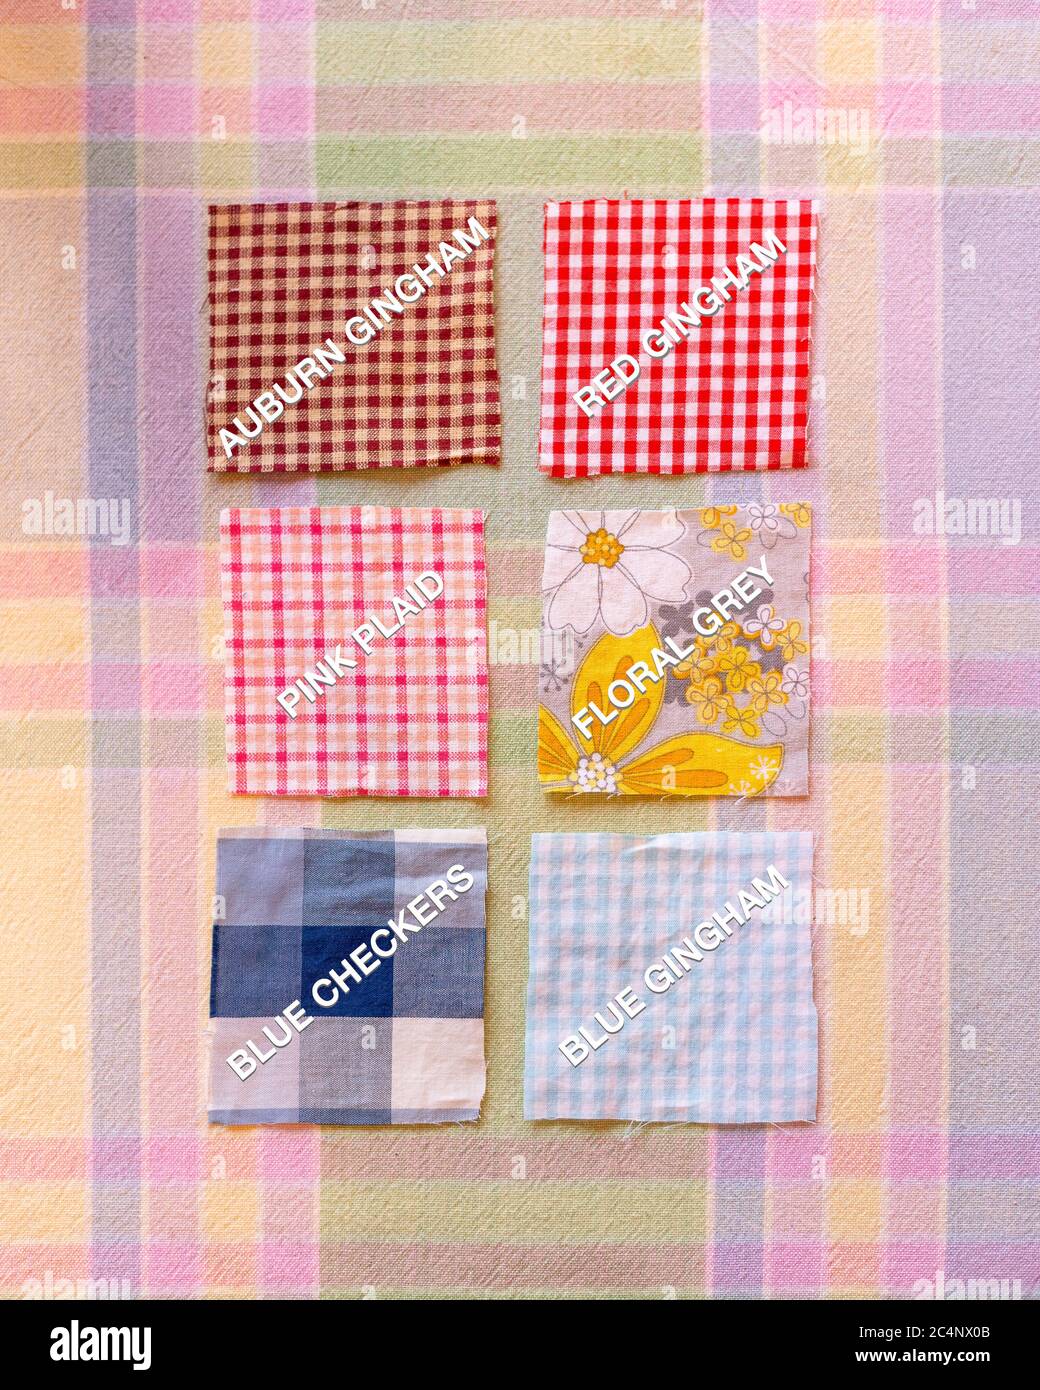 labeled fabric swatches red gingham grey flowers auburn gingham pink gingham big blue checks light blue gingham Stock Photo